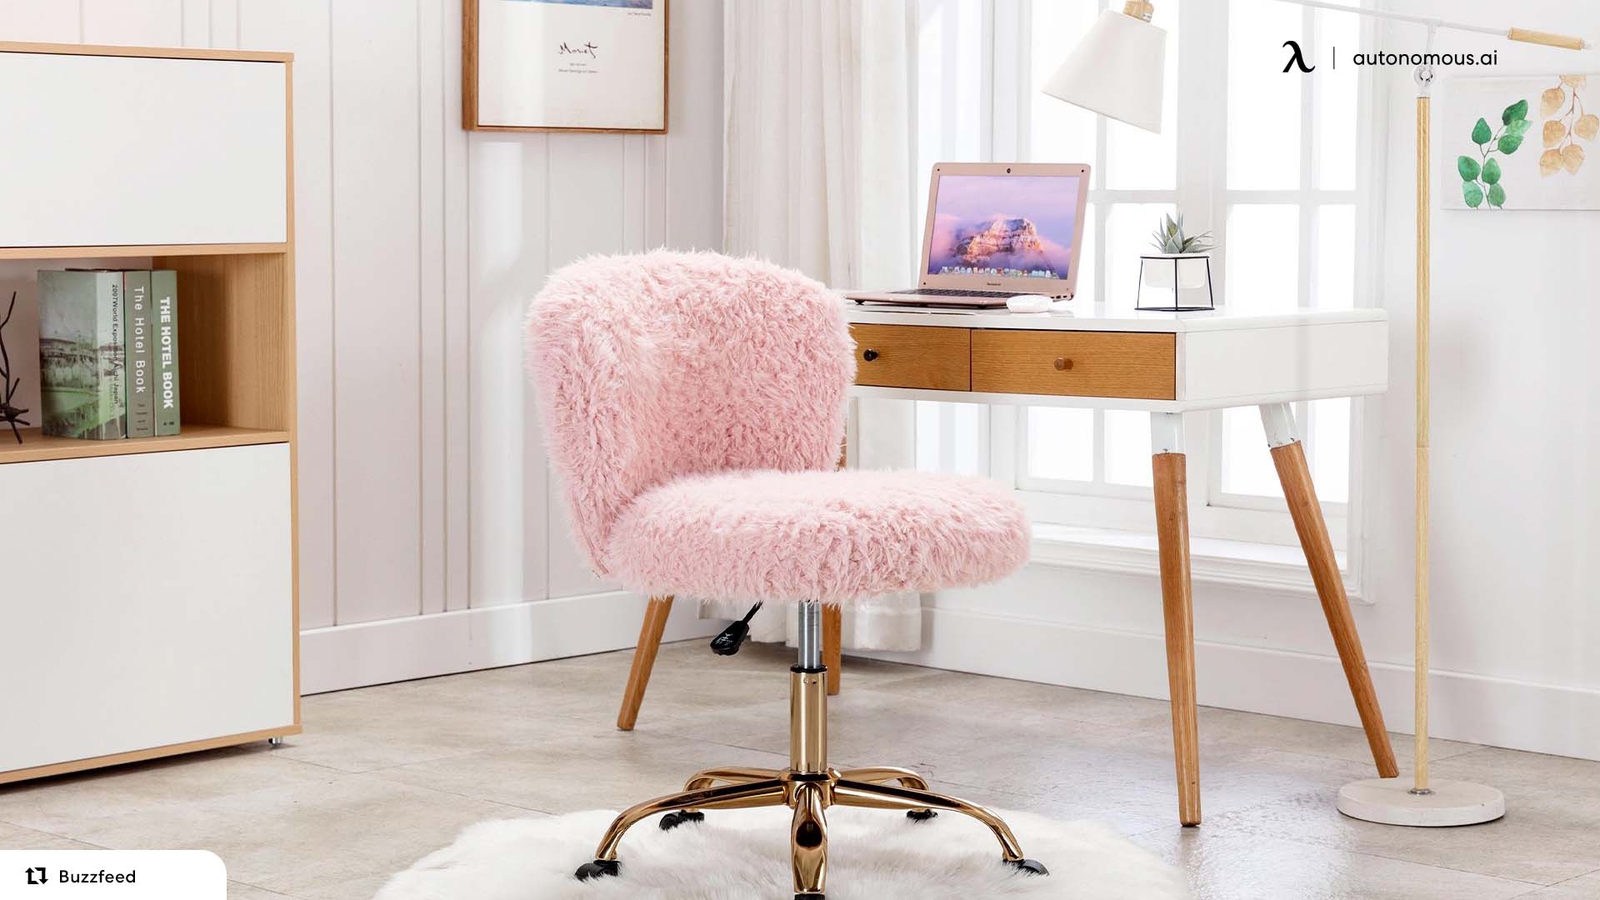 DIY A Fuzzy Desk Chair with Arms from Your Office Chair